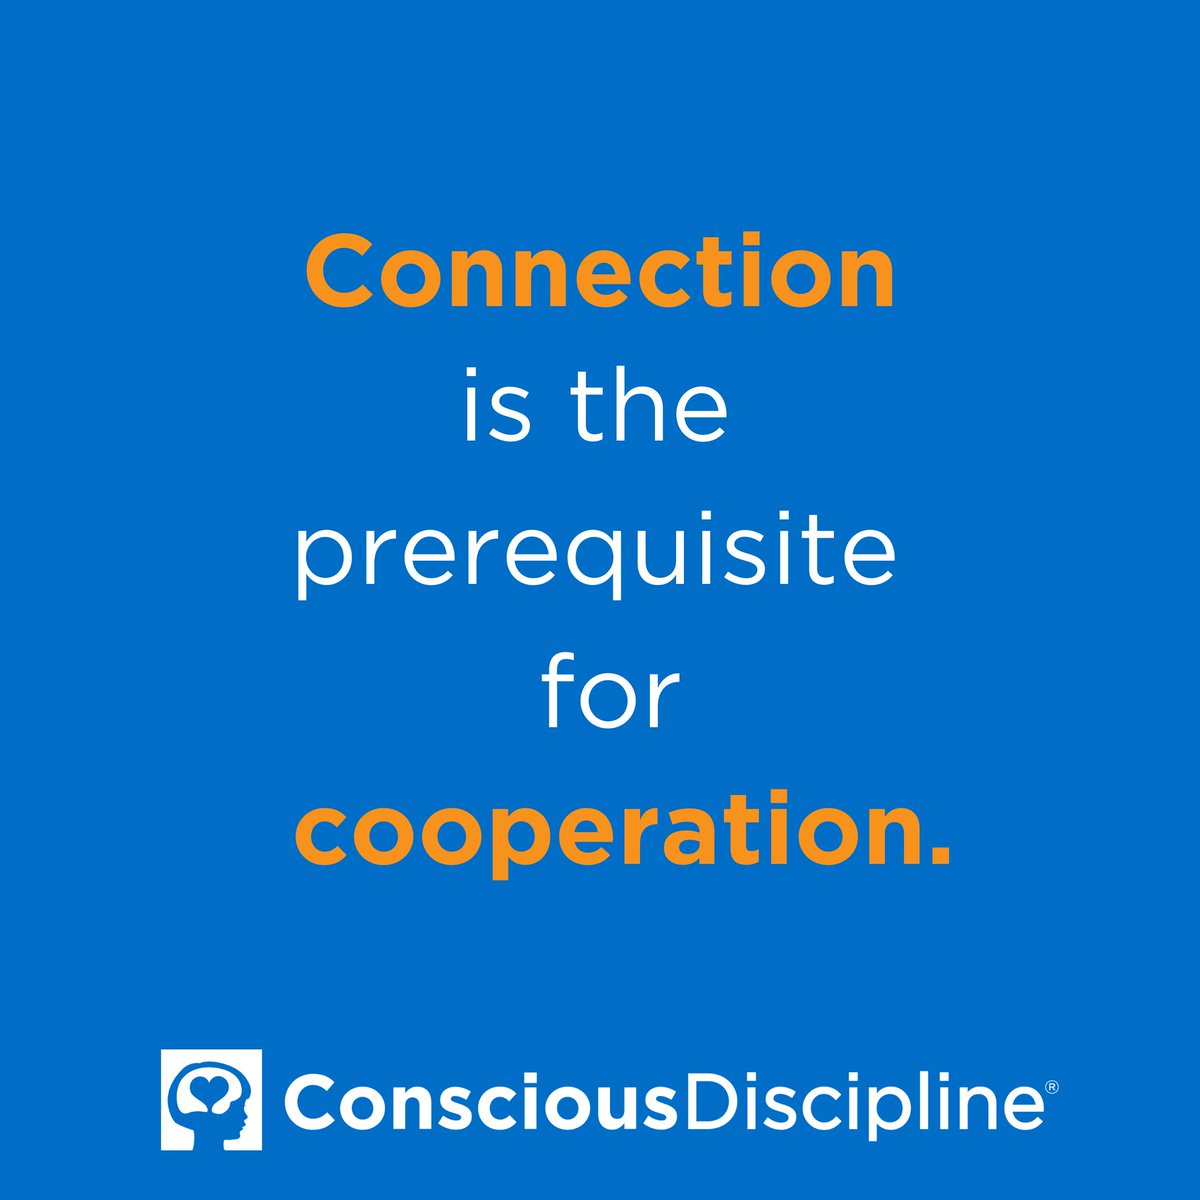 🧡 Connection is the glue that binds us together and helps us endure life’s twists, turns, disappointments and hardships. A strong sense of connection also increases children’s cooperation and attention spans while decreasing power struggles and attention-seeking behaviors.